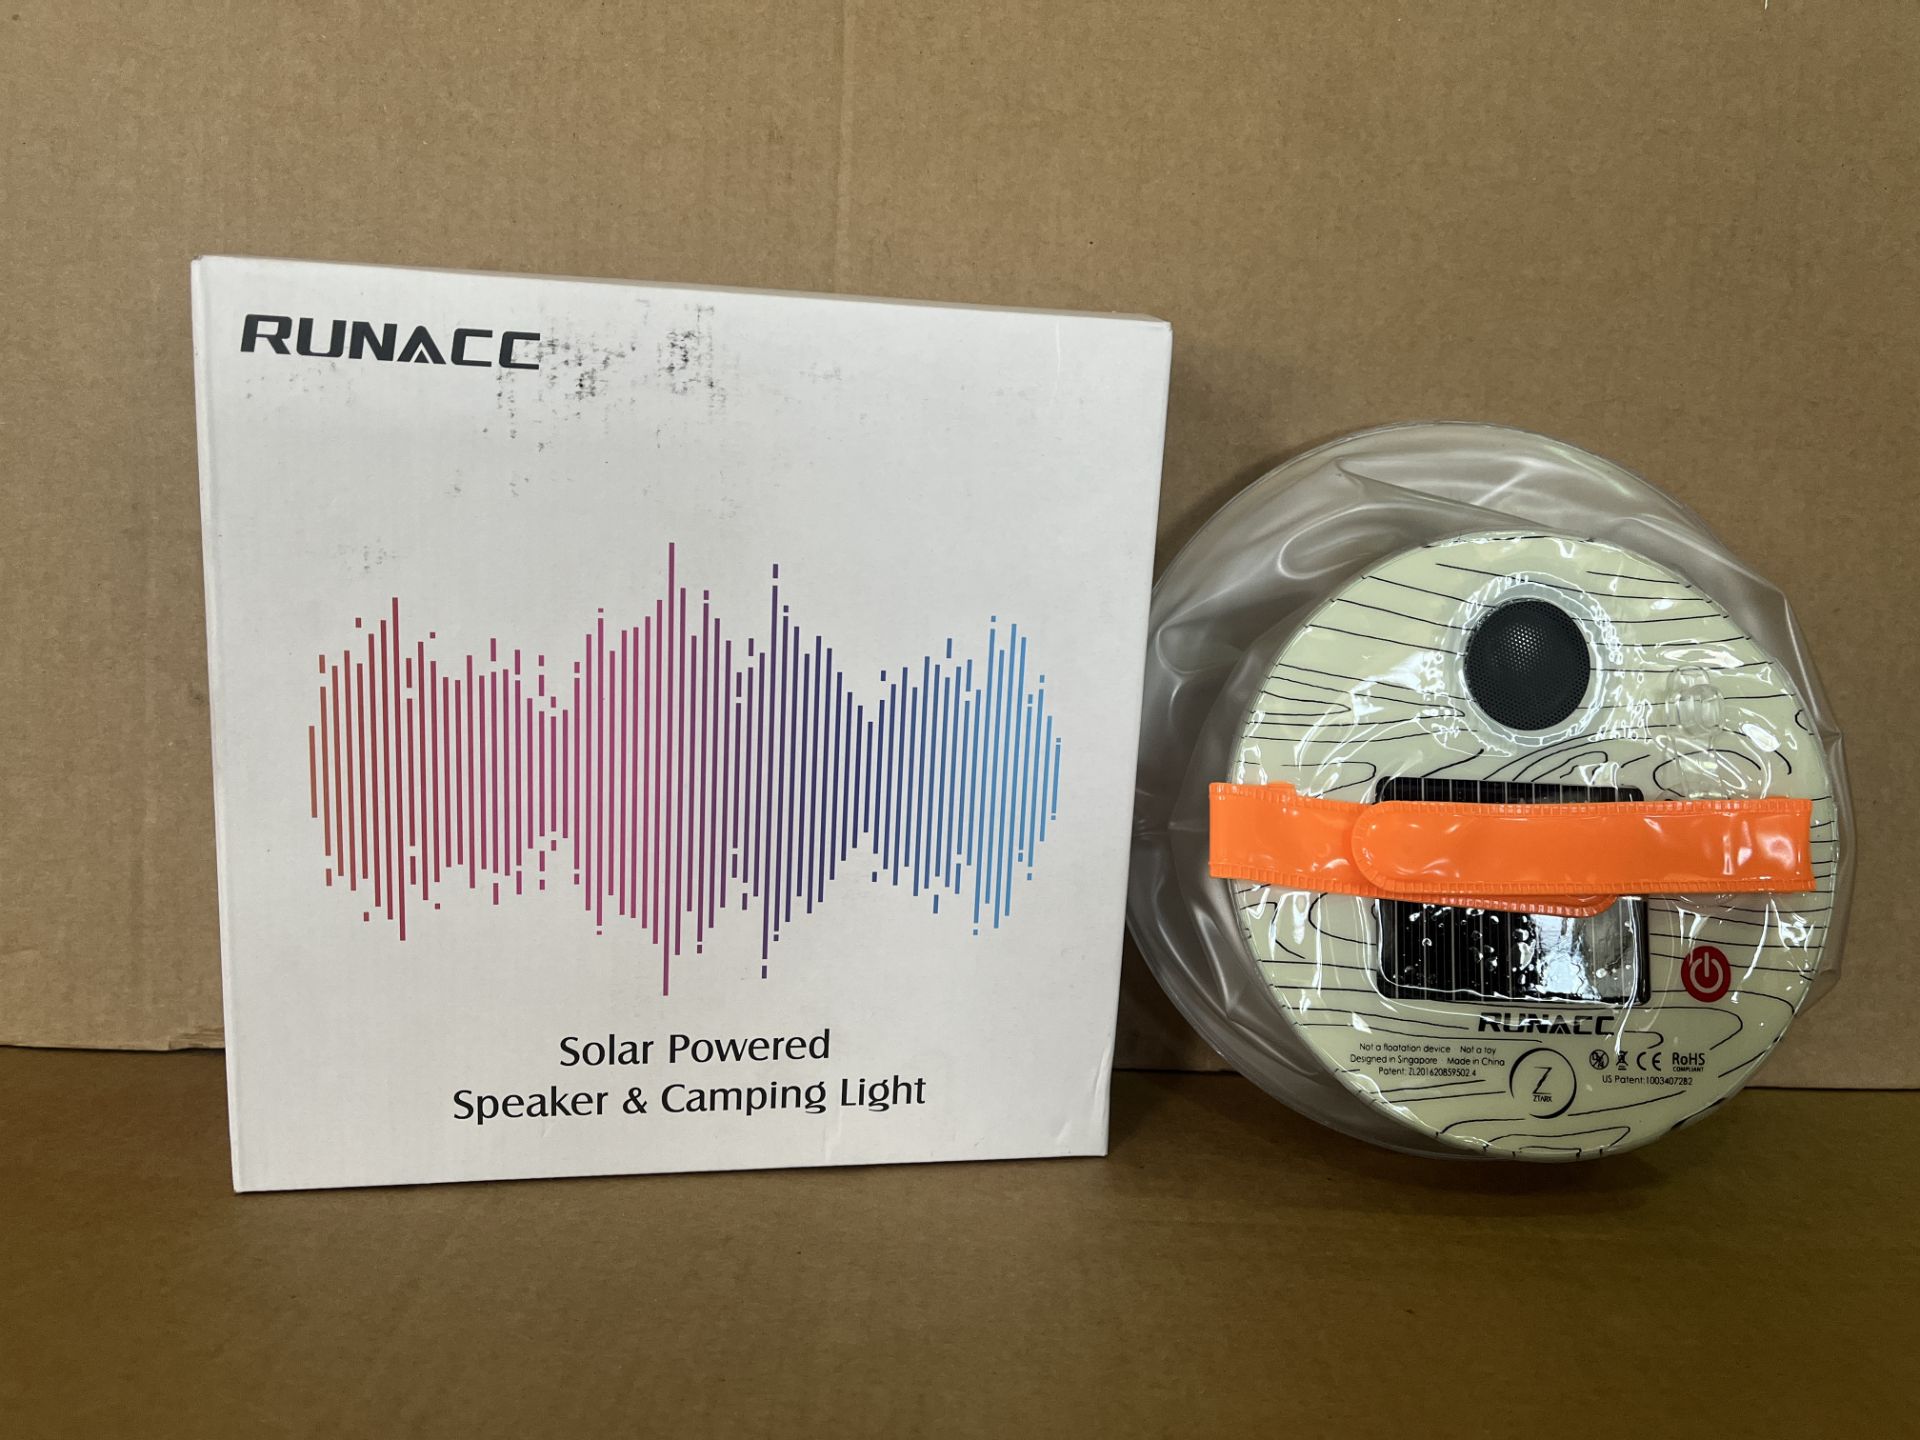 10 X BRAND NEW SOLAR POWERED CAMPING/FISHING SPEAKER AND LIGHT, USB CHARGING AND USB OUTPUT R15